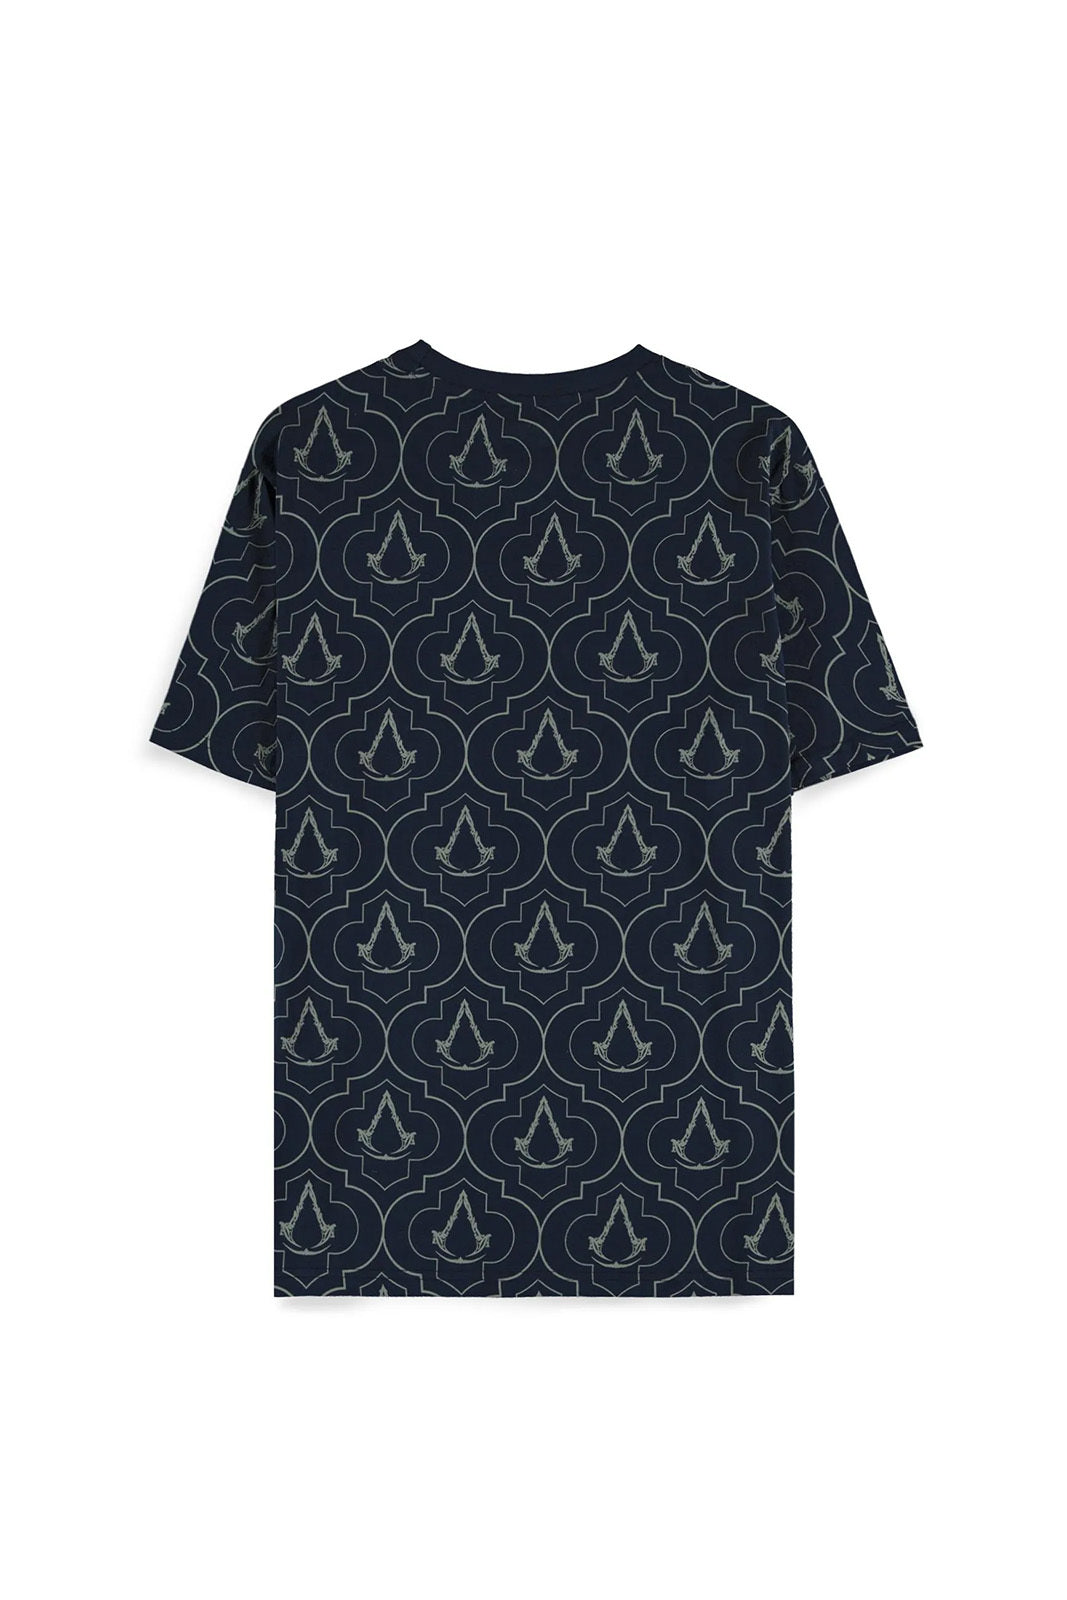 T-Shirt - Assassin's Creed Mirage -  Cluster